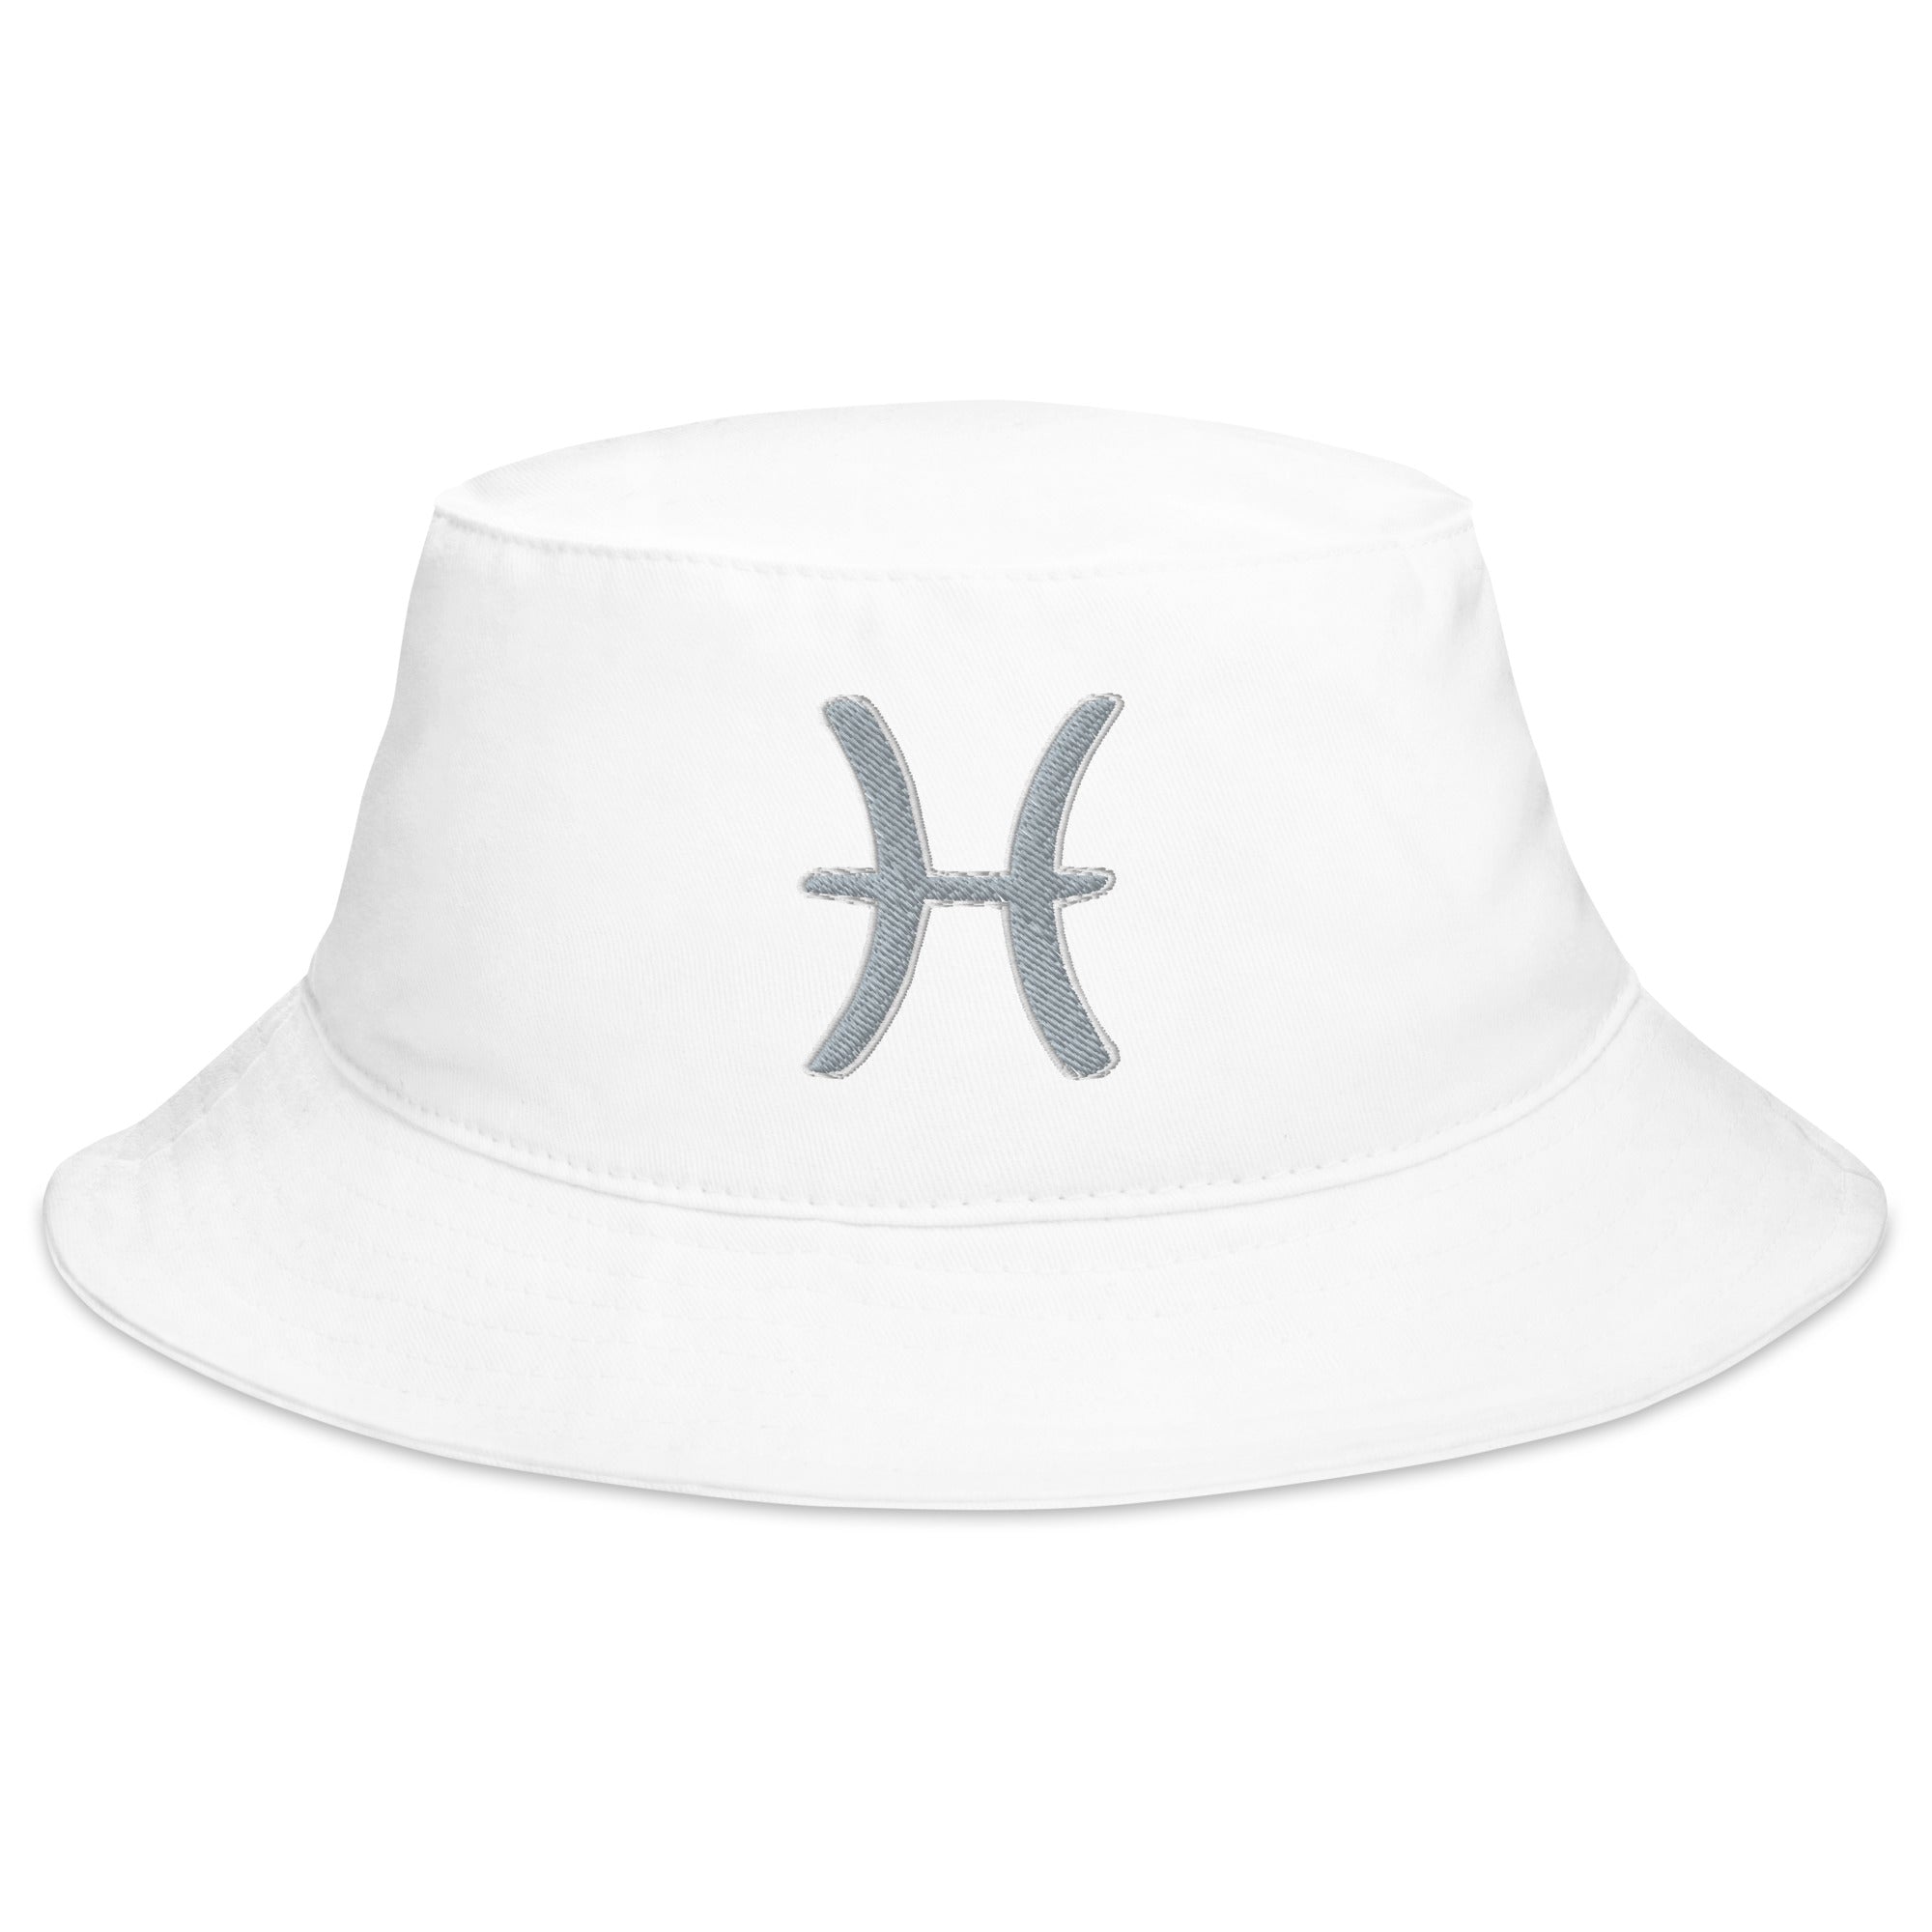 Zodiac Sign Pisces Embroidered Bucket Hat Astrology Horoscope